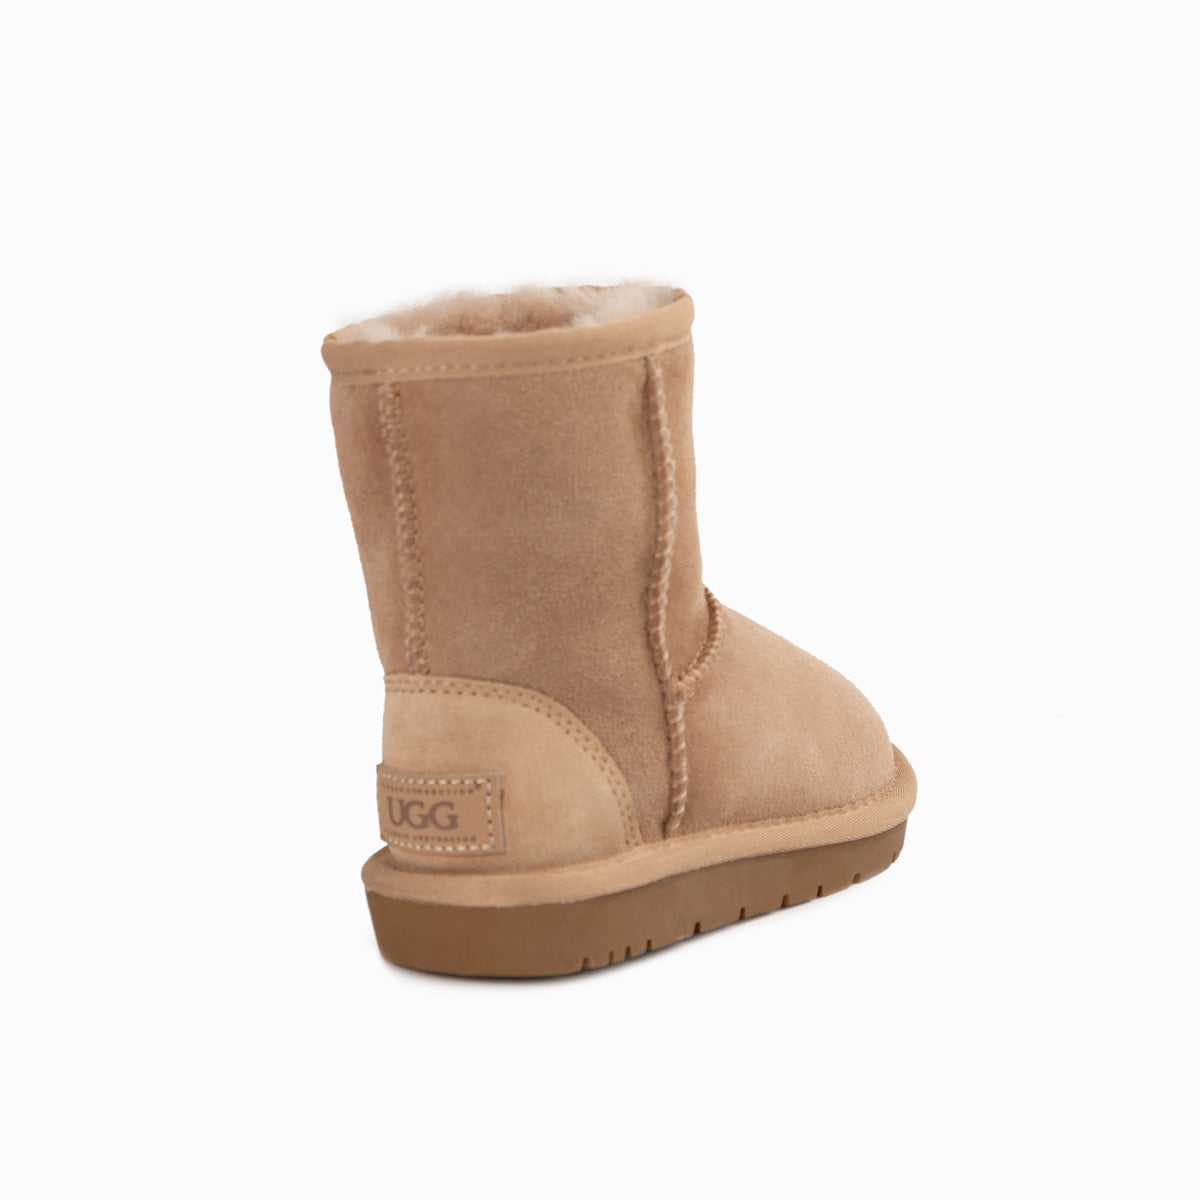 UGG Kids Classic Long Boots Water-Resistant